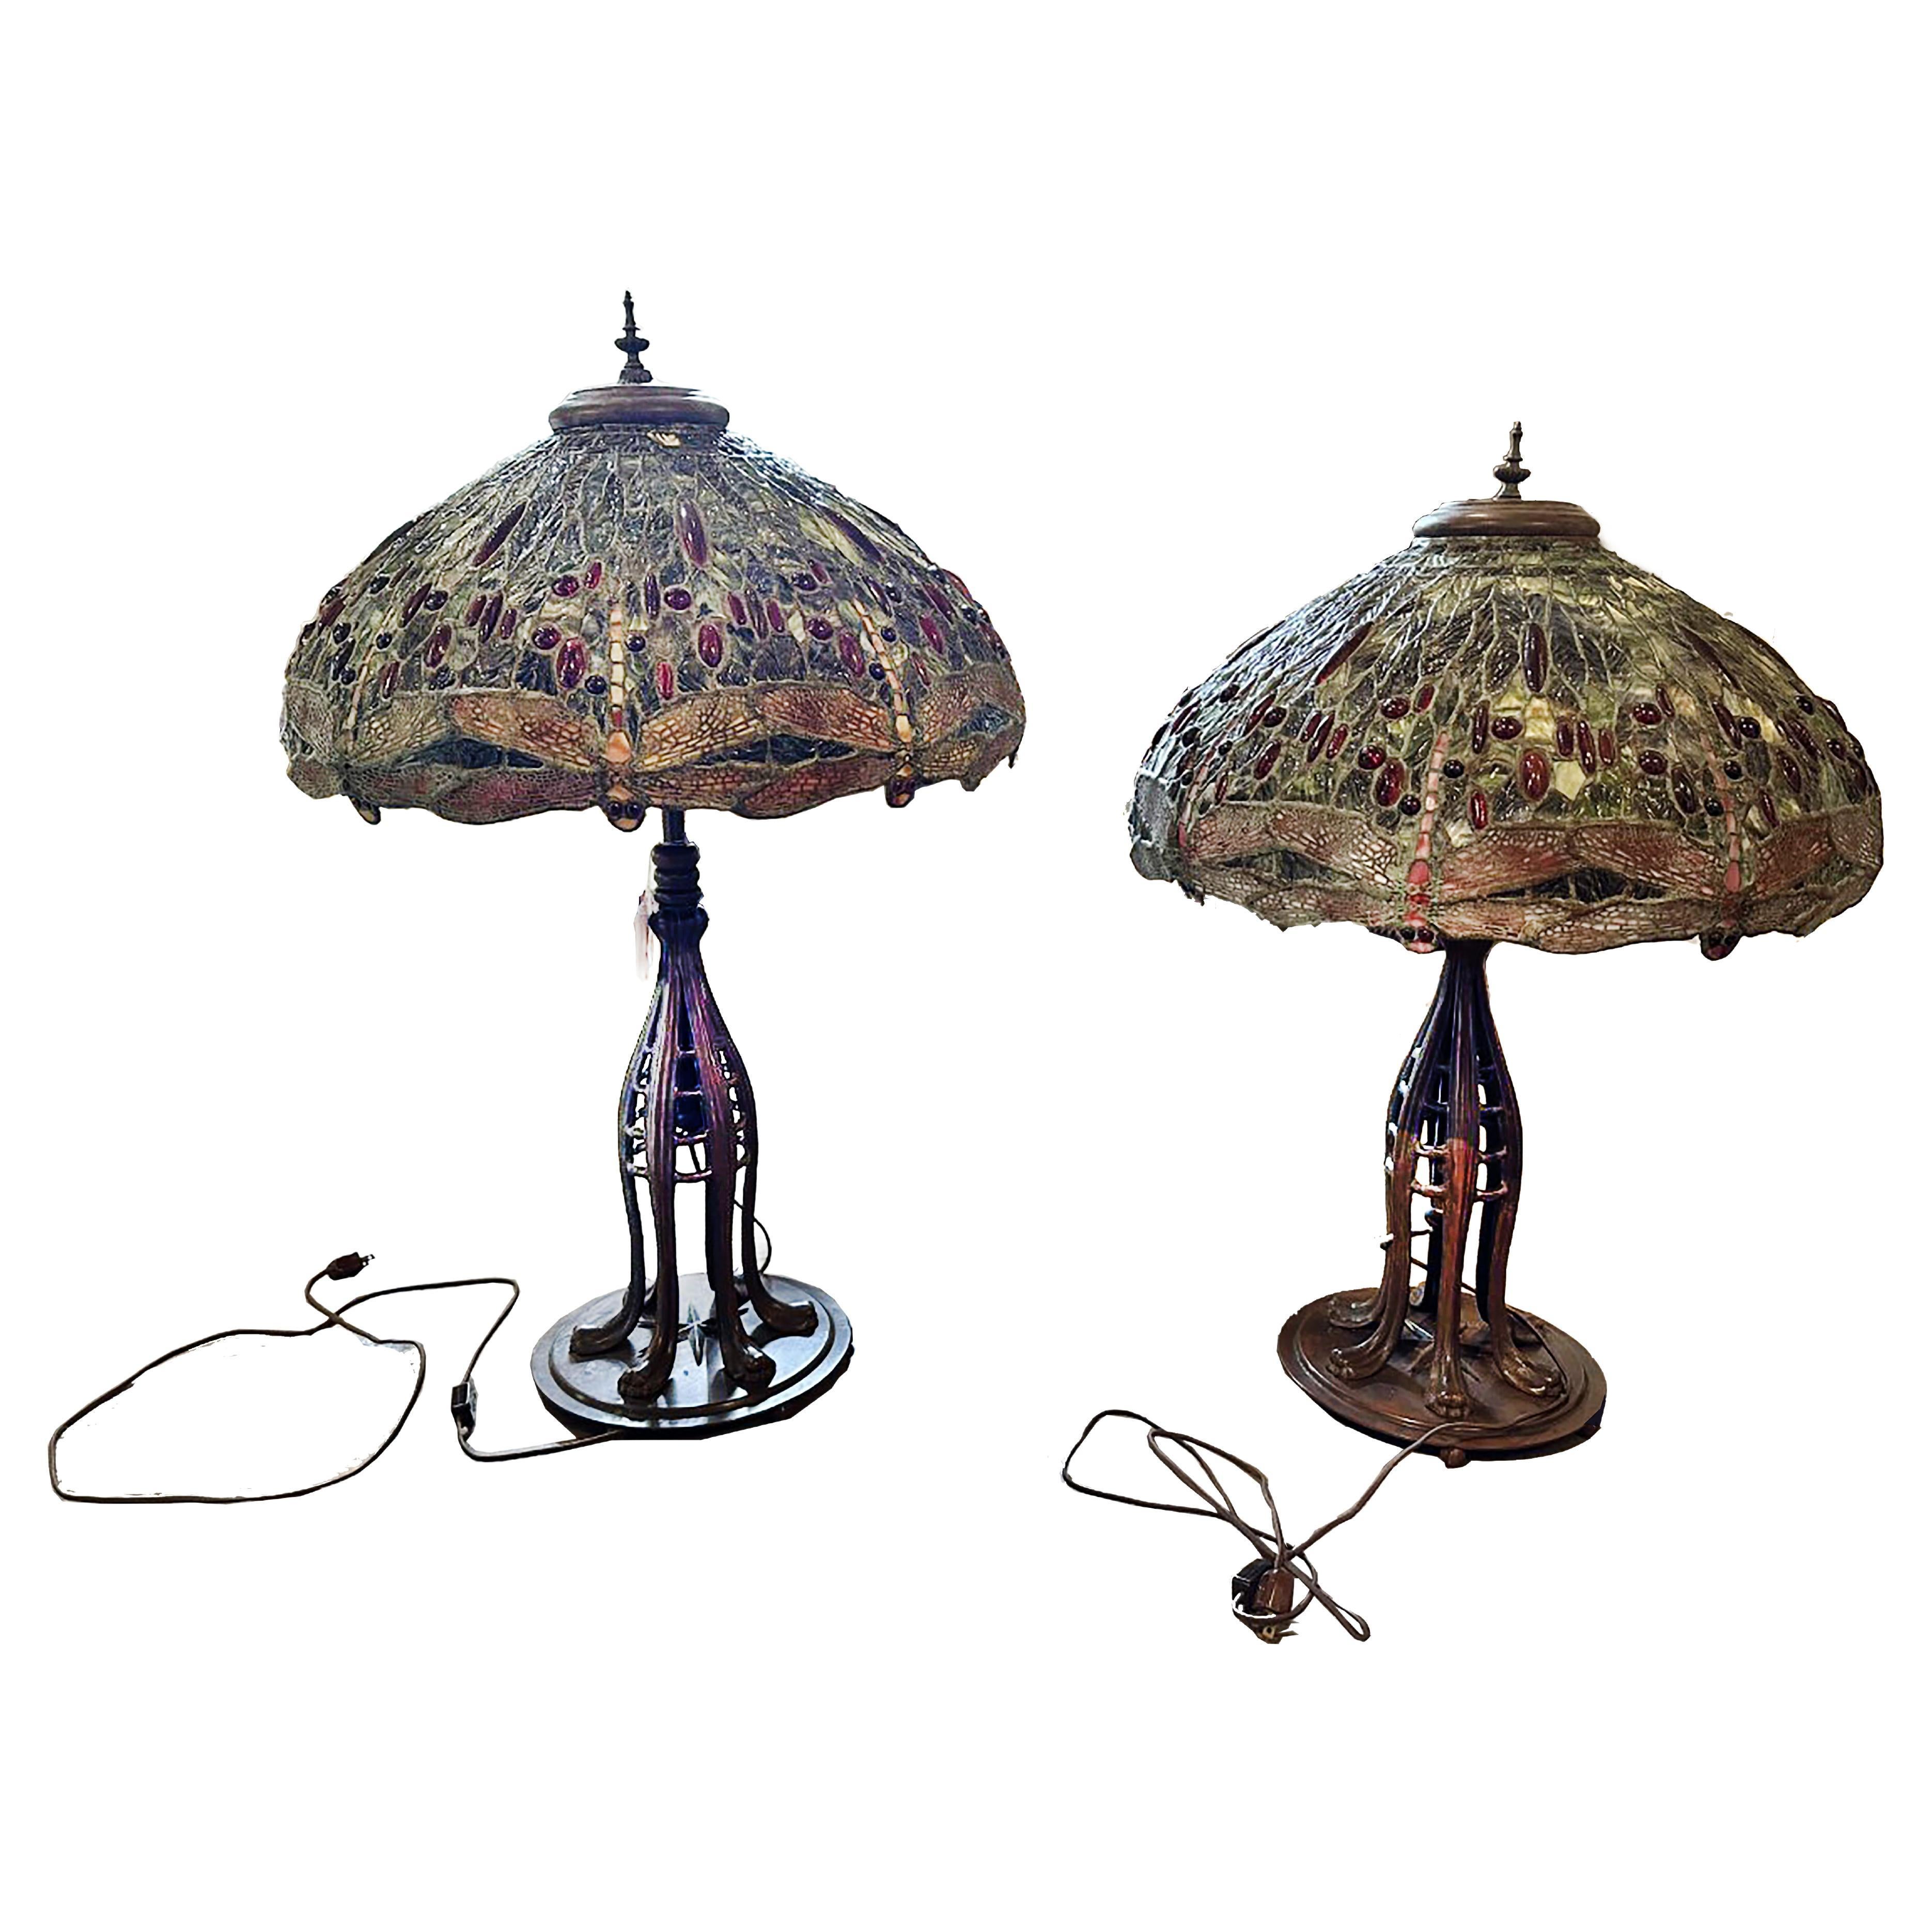 Pair of Art Nouveau Tiffany Style Lamps with Hand Leaded Glass Shades